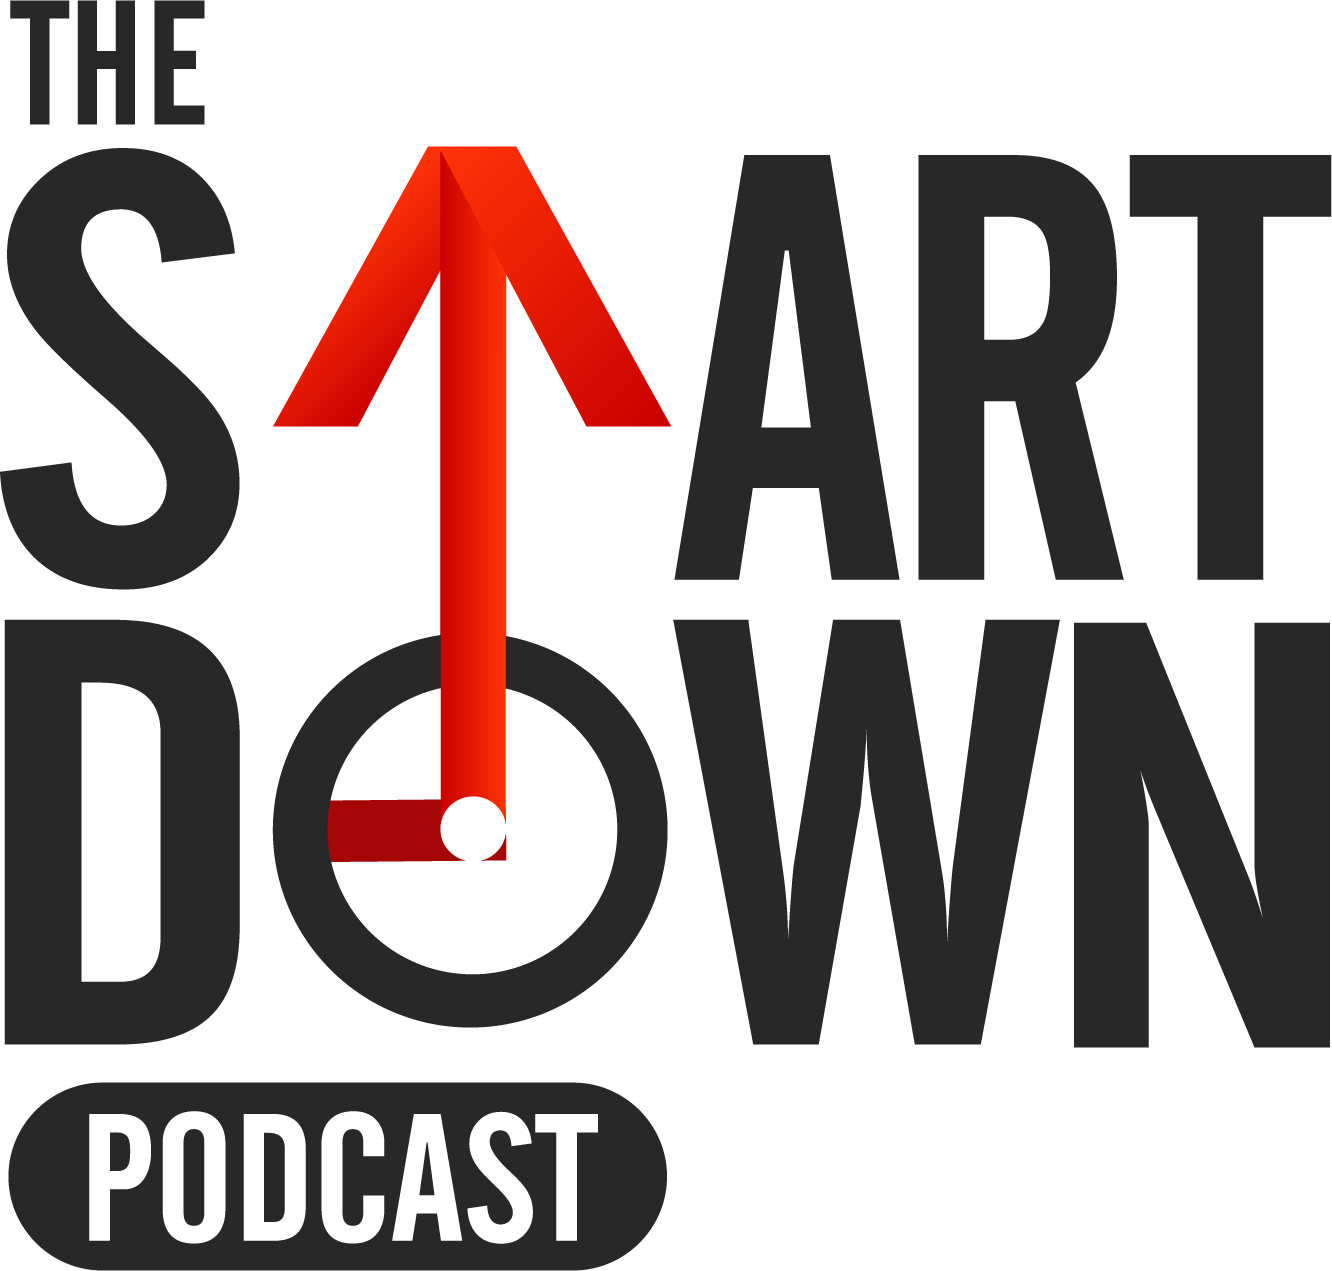 The Start Down Podcast logo.png